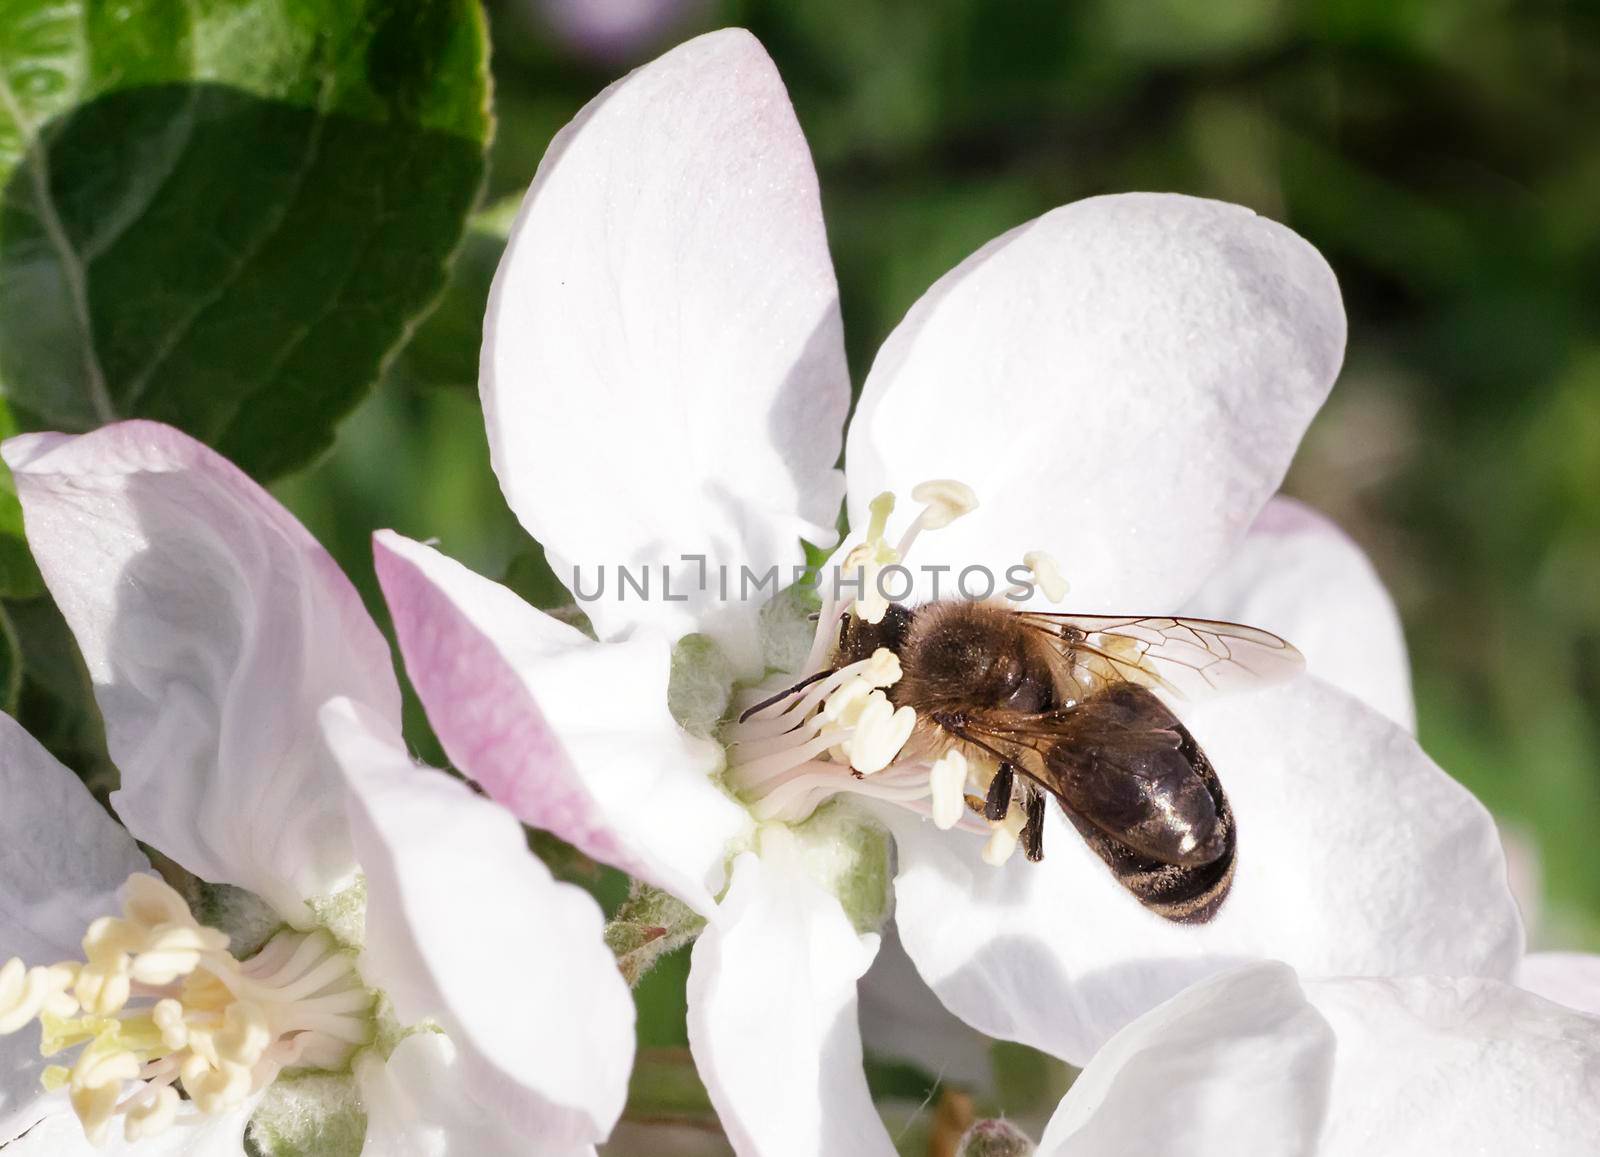 On the branch of a tree with lots of pink and white flowers and buds the bee in the center of the flower collecting nectar.